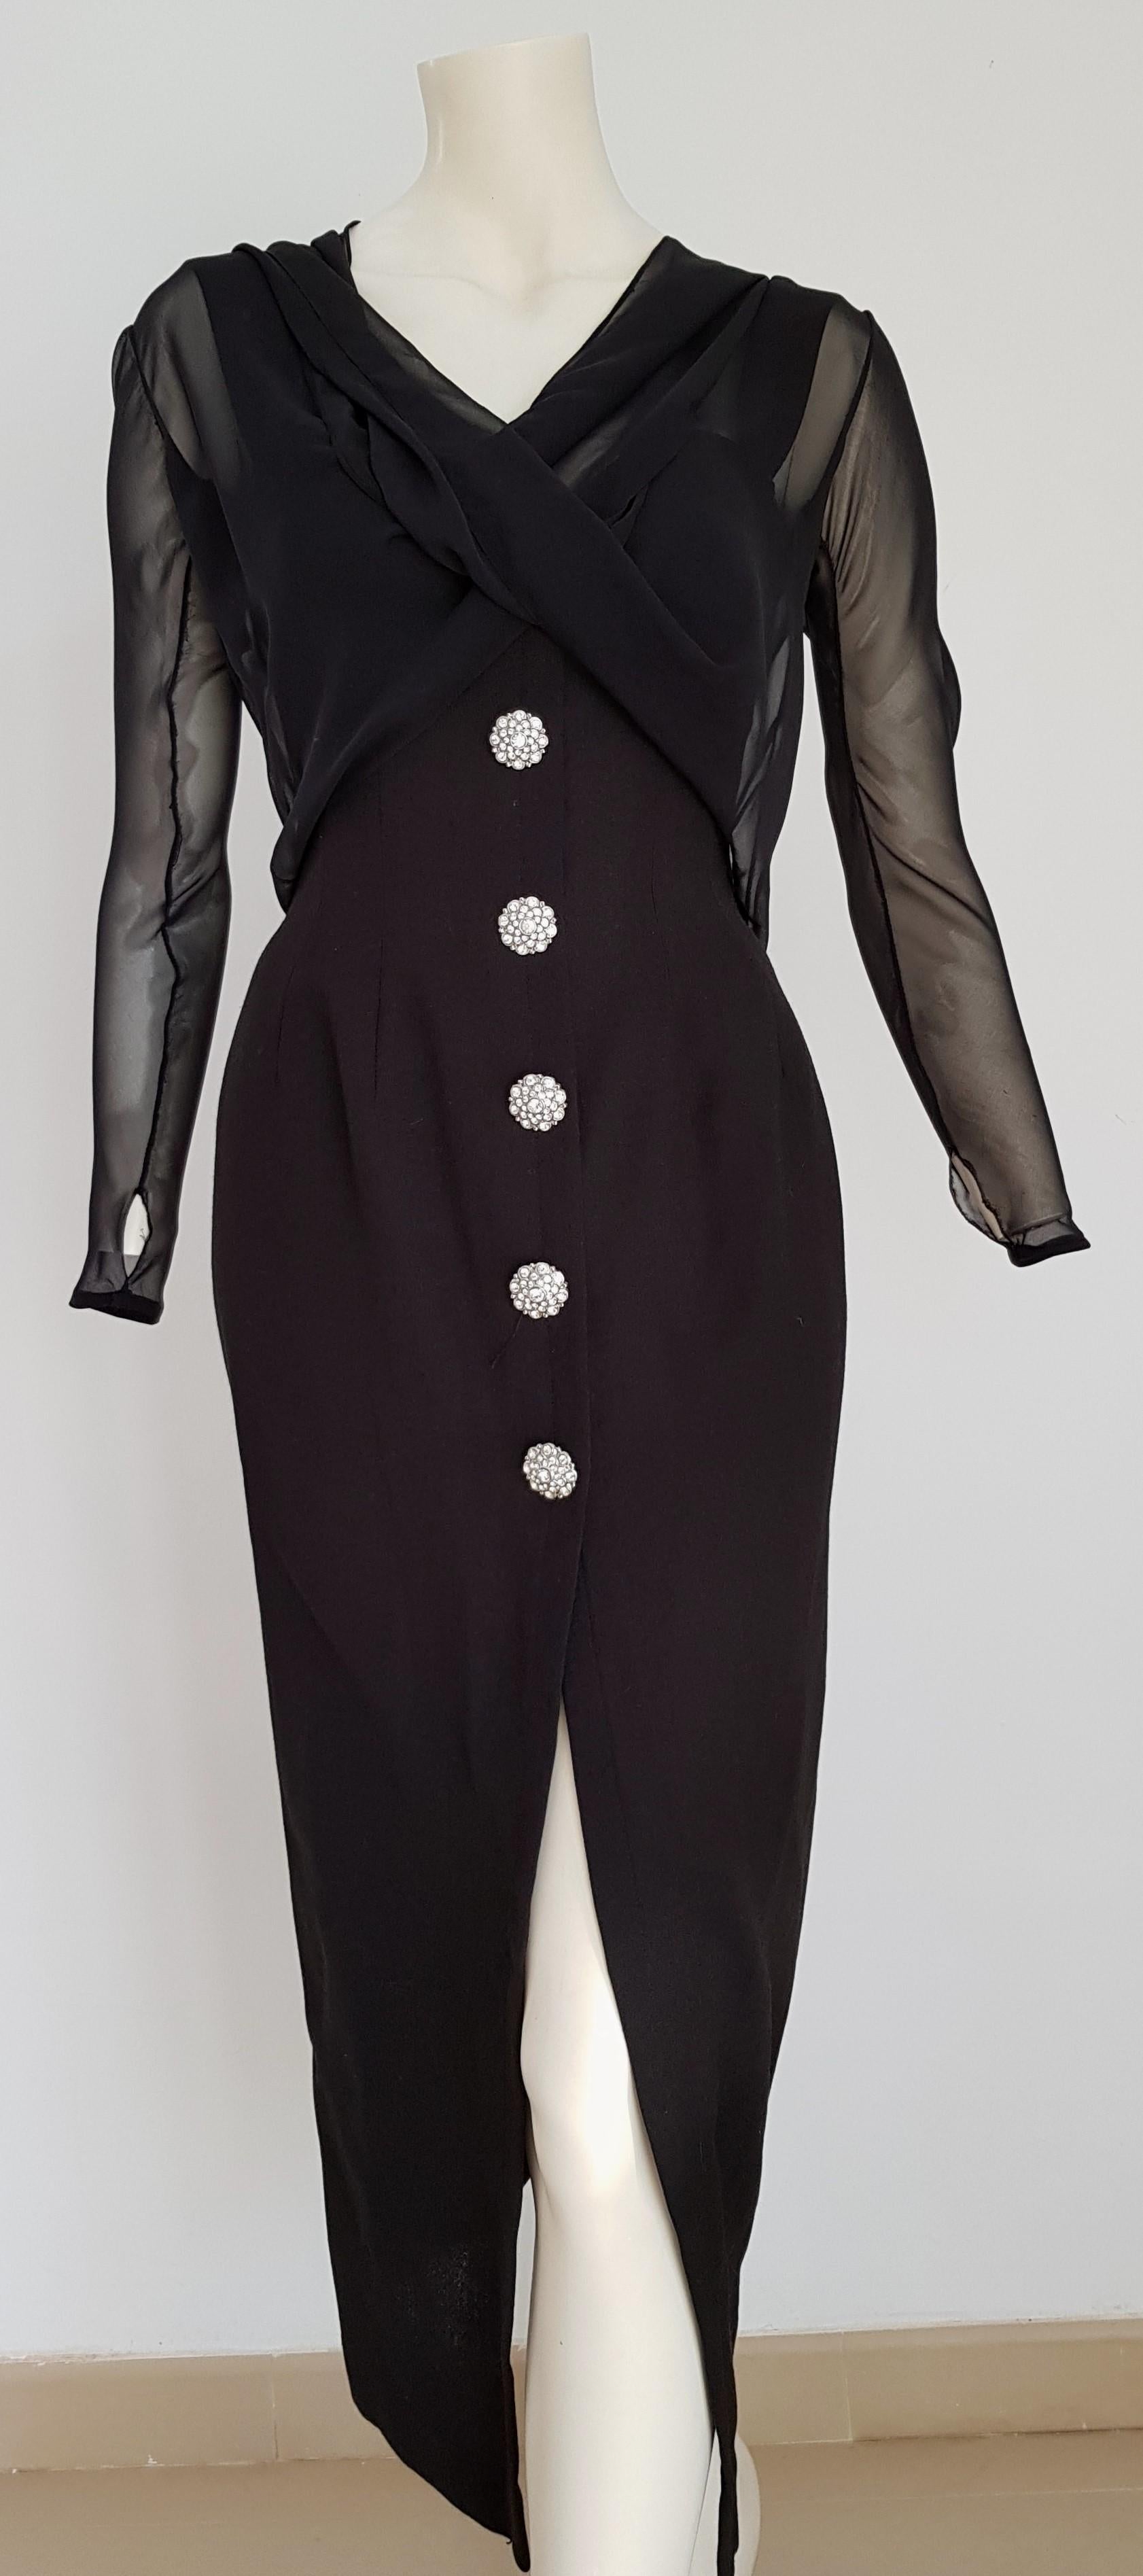 Isabelle ALLARD Paris, six swarovski buttons, chiffon blouse as top, silk wool black dress - Created in the Couture atelier of the Rue Saint Honoré Paris - Unworn, New.

Isabelle ALLARD is a Paris brand that created only haute couture and selling to